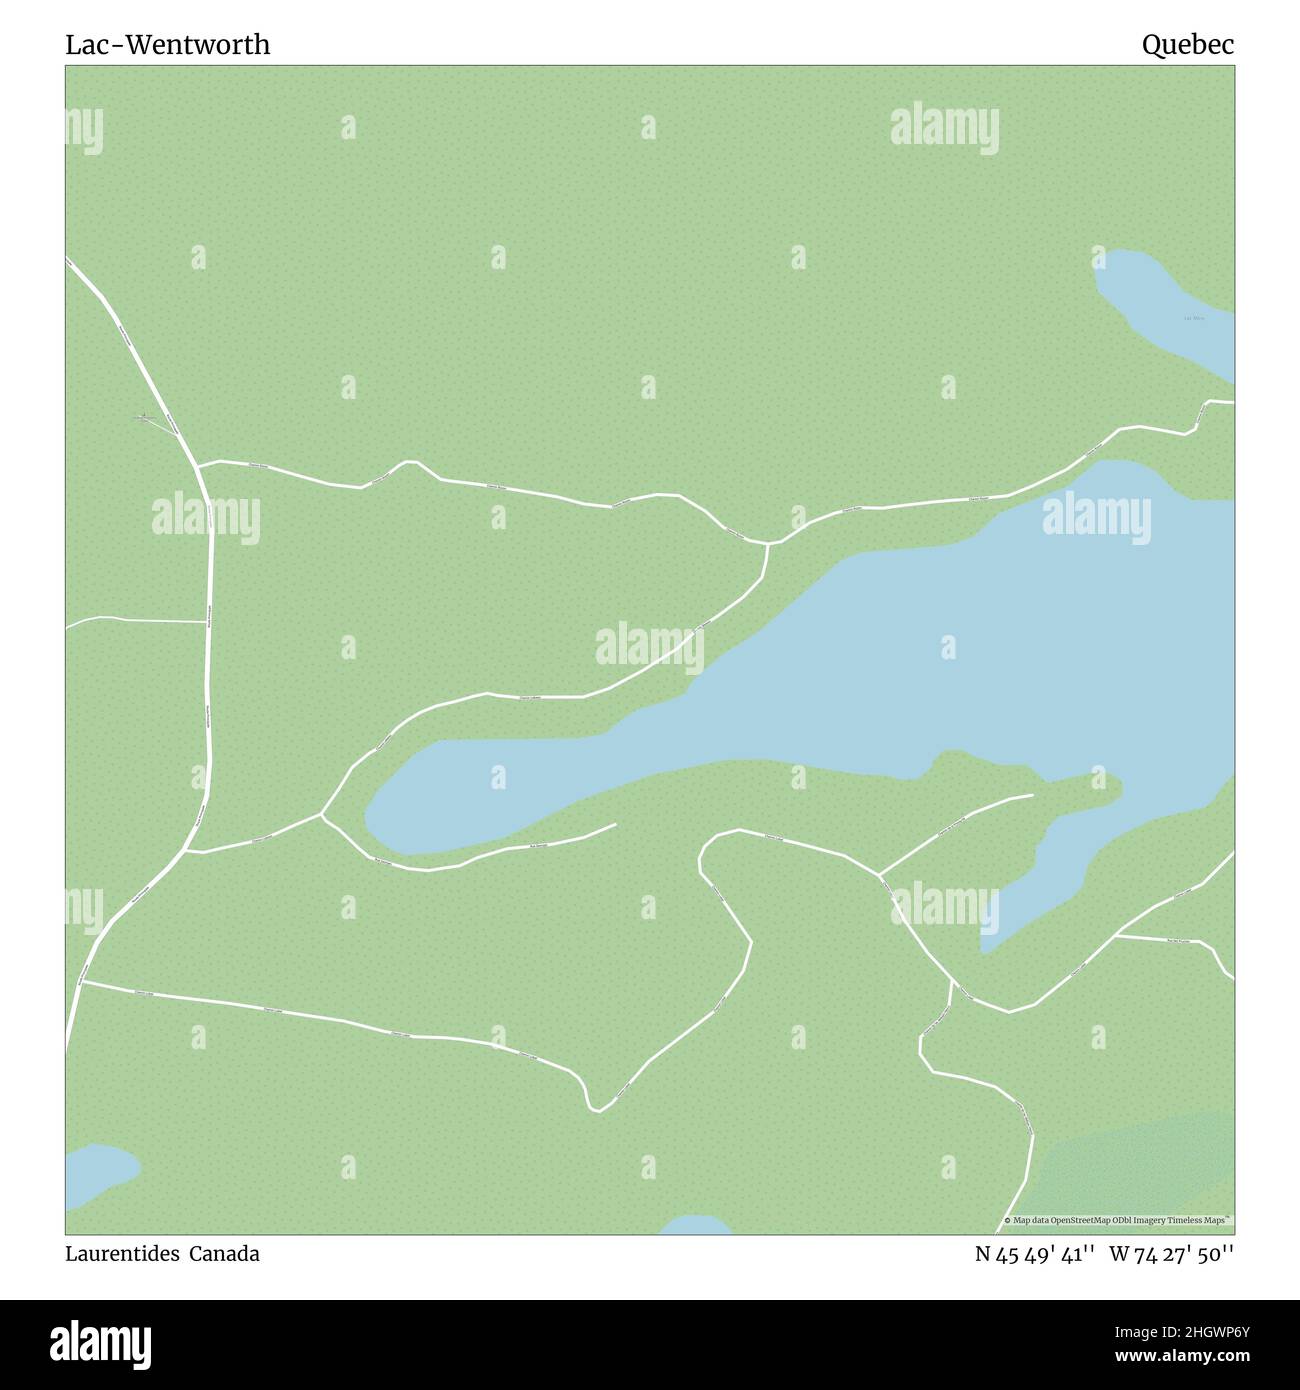 Lac-Wentworth, Laurentides, Canada, Quebec, N 45 49' 41'', W 74 27' 50'', map, Timeless Map published in 2021. Travelers, explorers and adventurers like Florence Nightingale, David Livingstone, Ernest Shackleton, Lewis and Clark and Sherlock Holmes relied on maps to plan travels to the world's most remote corners, Timeless Maps is mapping most locations on the globe, showing the achievement of great dreams Stock Photo